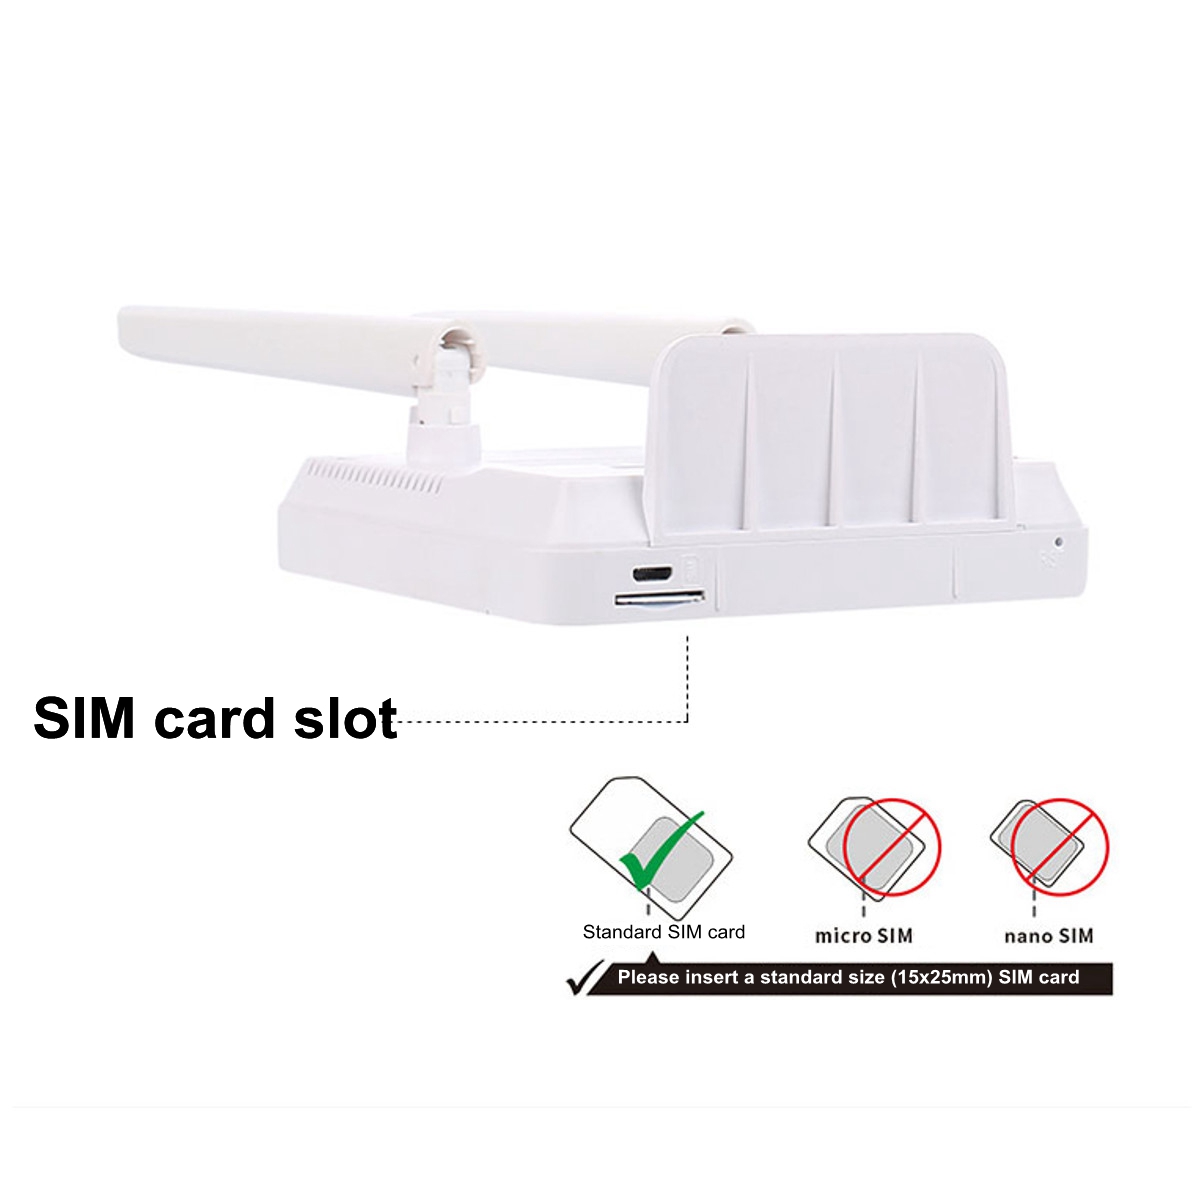 24G-4G-LTE-Wifi-Router-CPE-Router-Support-for-20-Users-with-SIM-Card-Slot-Wirelss-Wired-Router-1424481